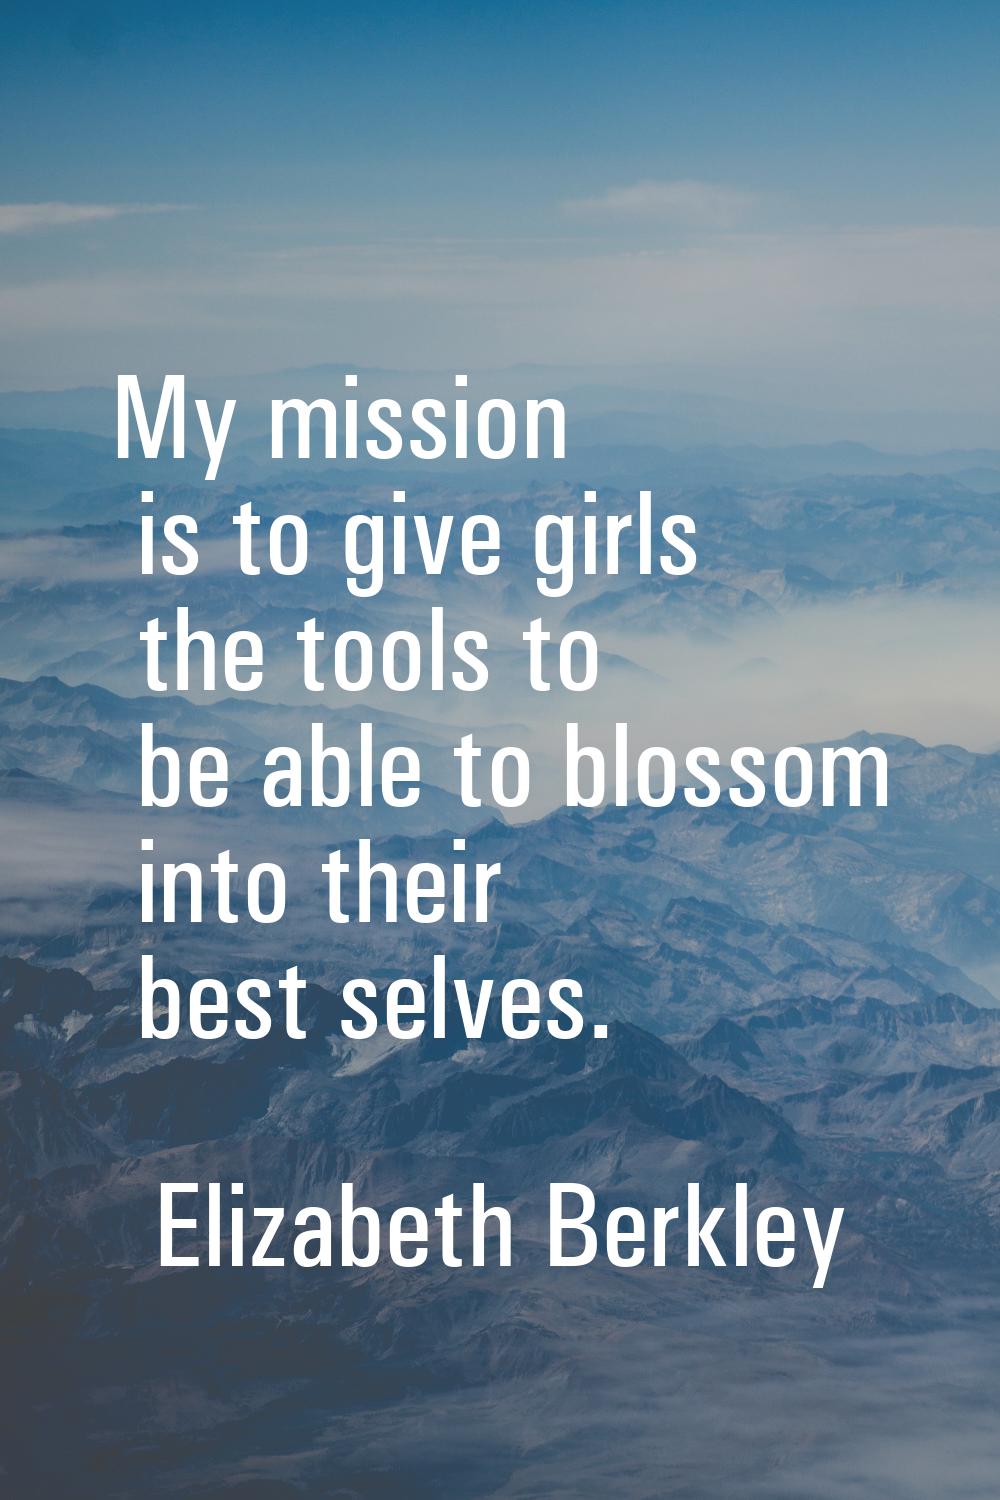 My mission is to give girls the tools to be able to blossom into their best selves.